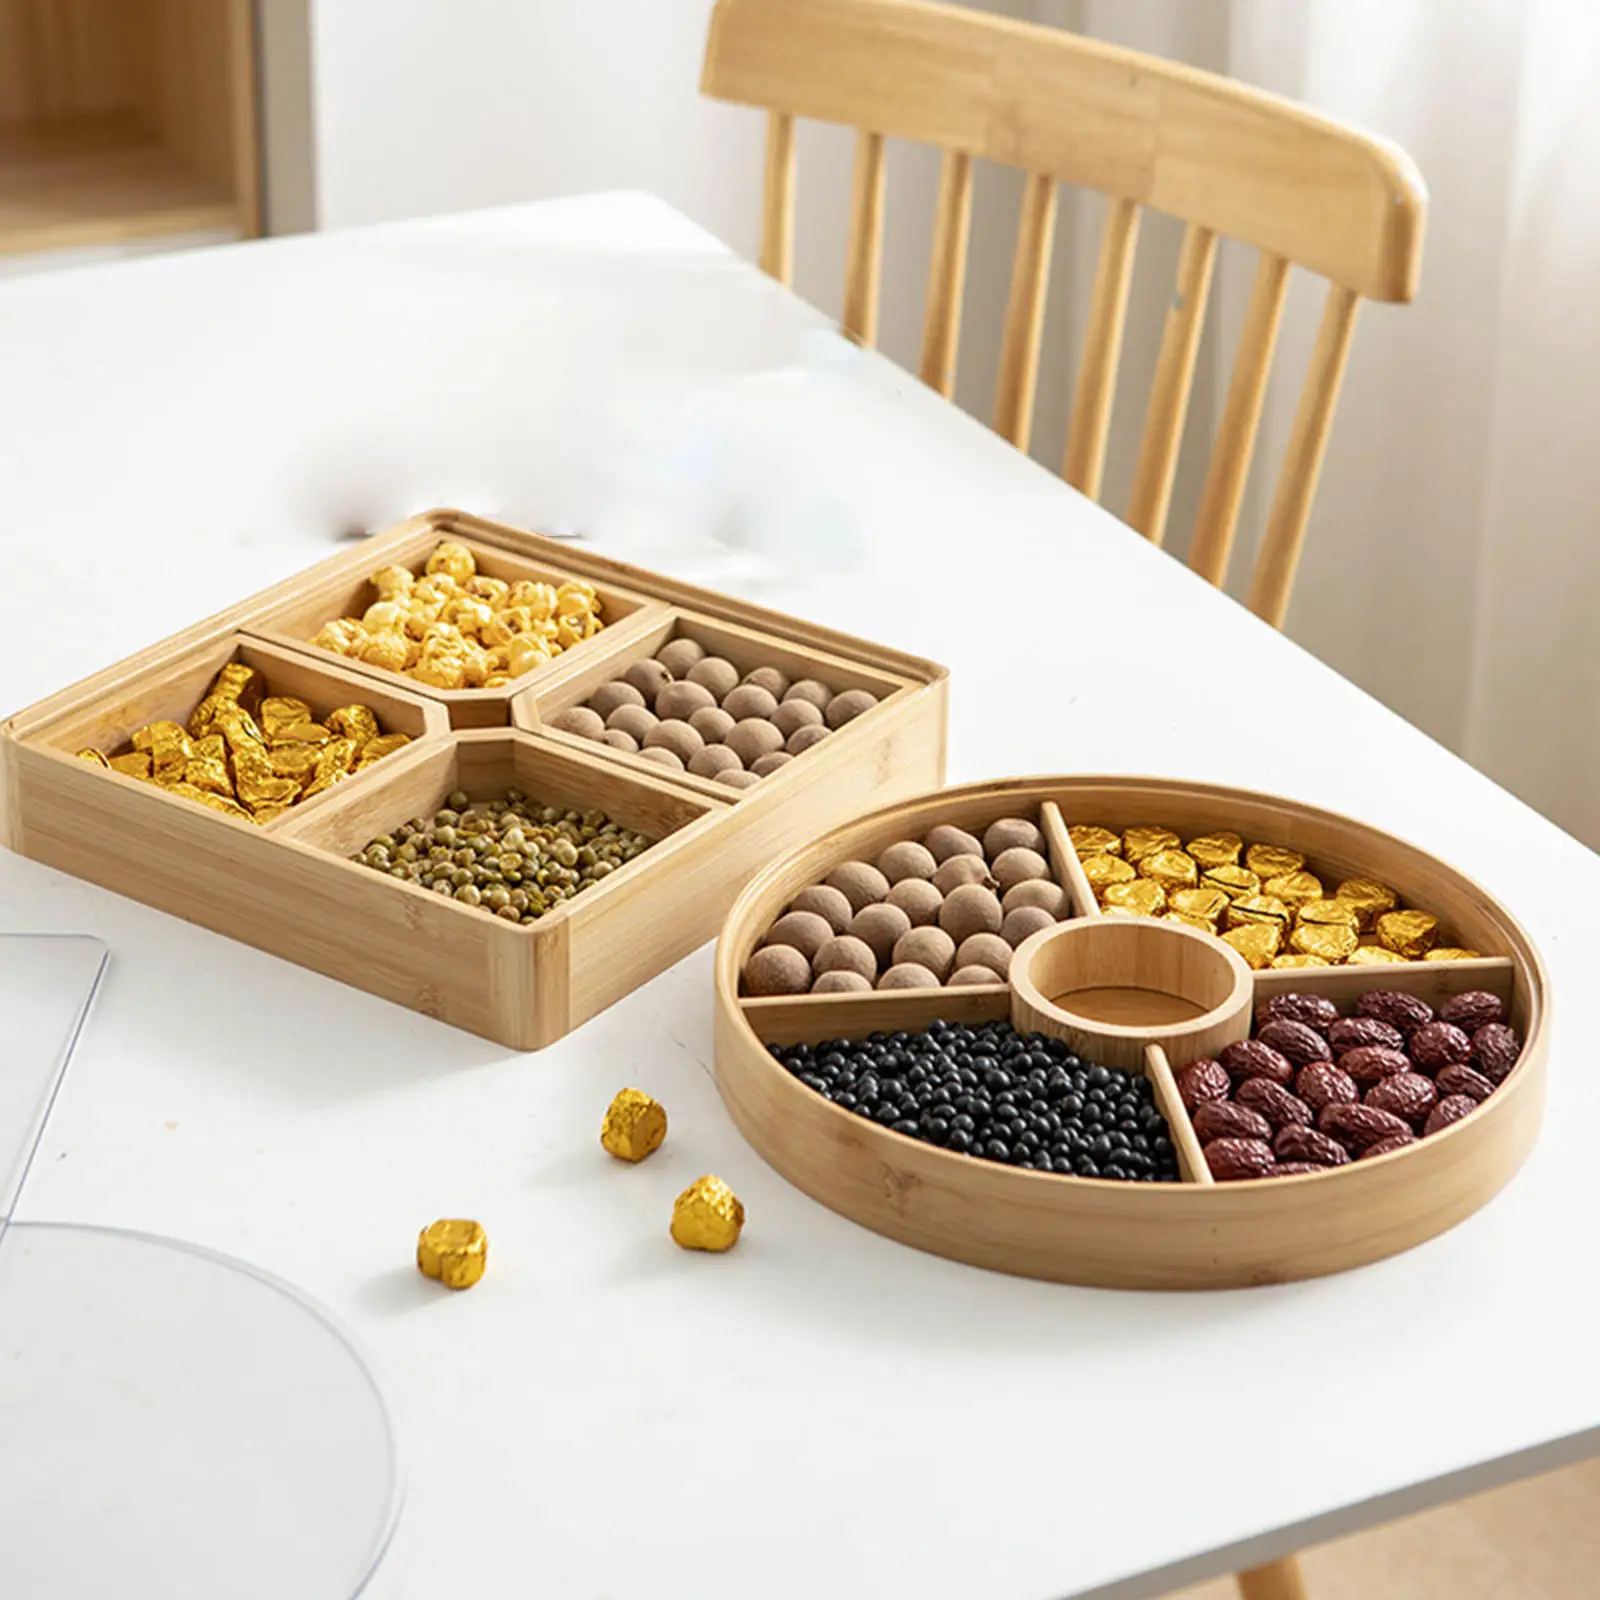 Bamboo Serving Tray, Snack Serving Board with 4 Plates, Nuts Gathering Tray for Party, Housewarming